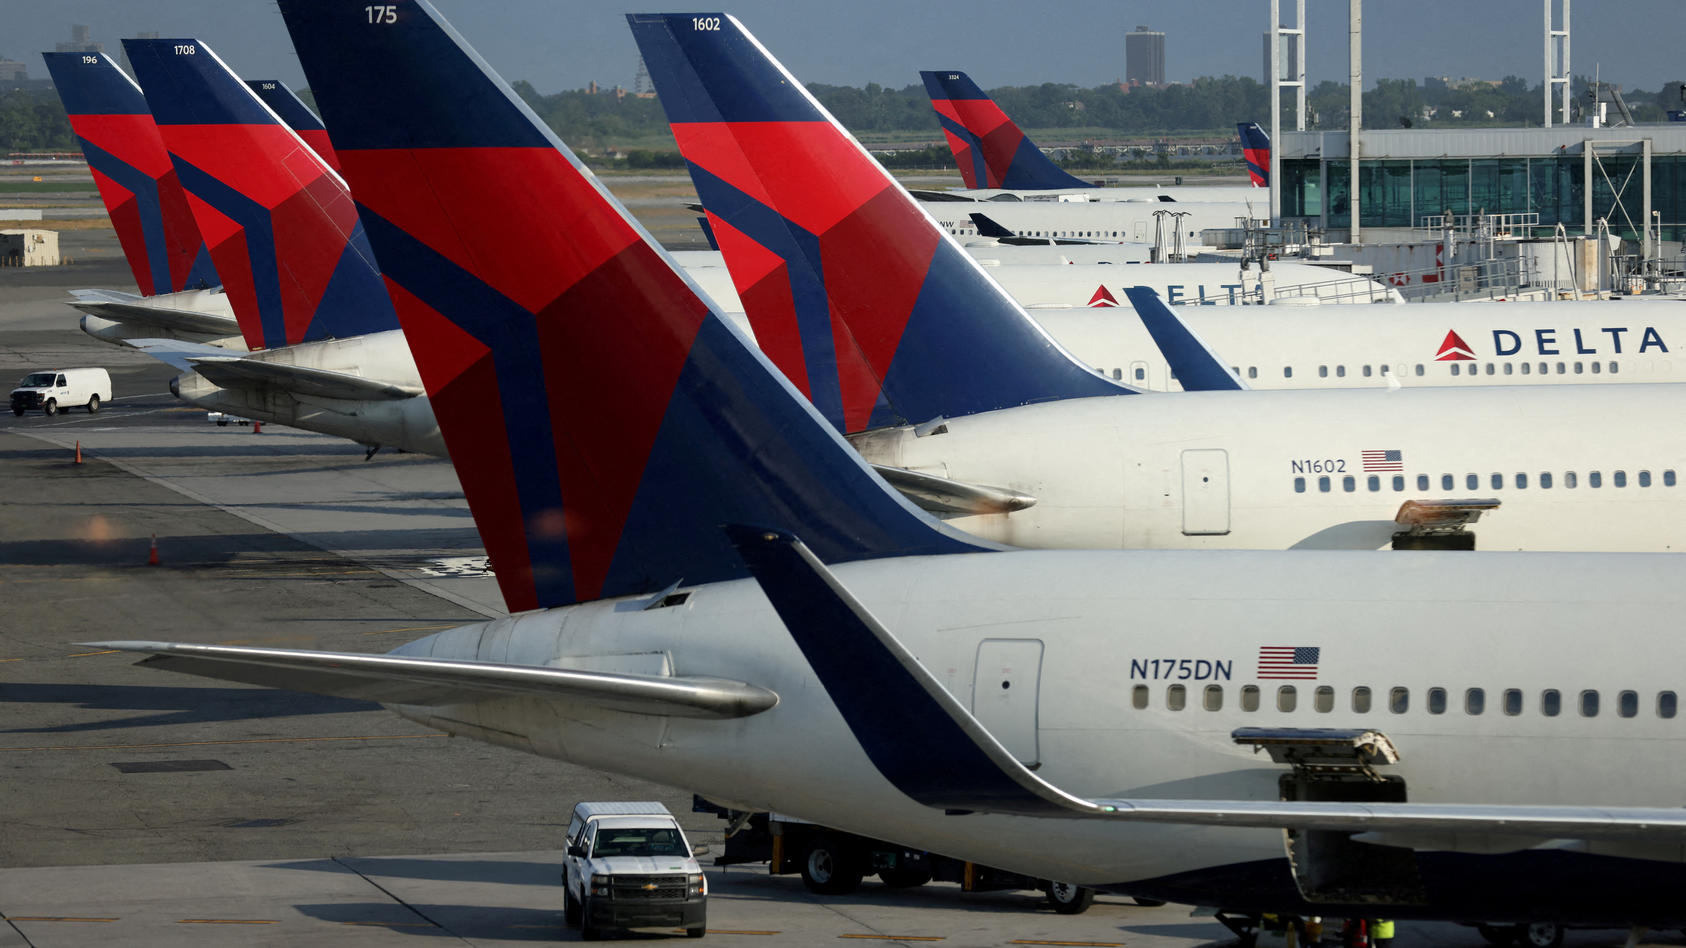 FILE PHOTO: Delta Air Lines planes are seen at John F. Kennedy International Airport on the July 4th weekend in Queens, New York City, U.S., July 2, 2022. REUTERS/Andrew Kelly/File Photo